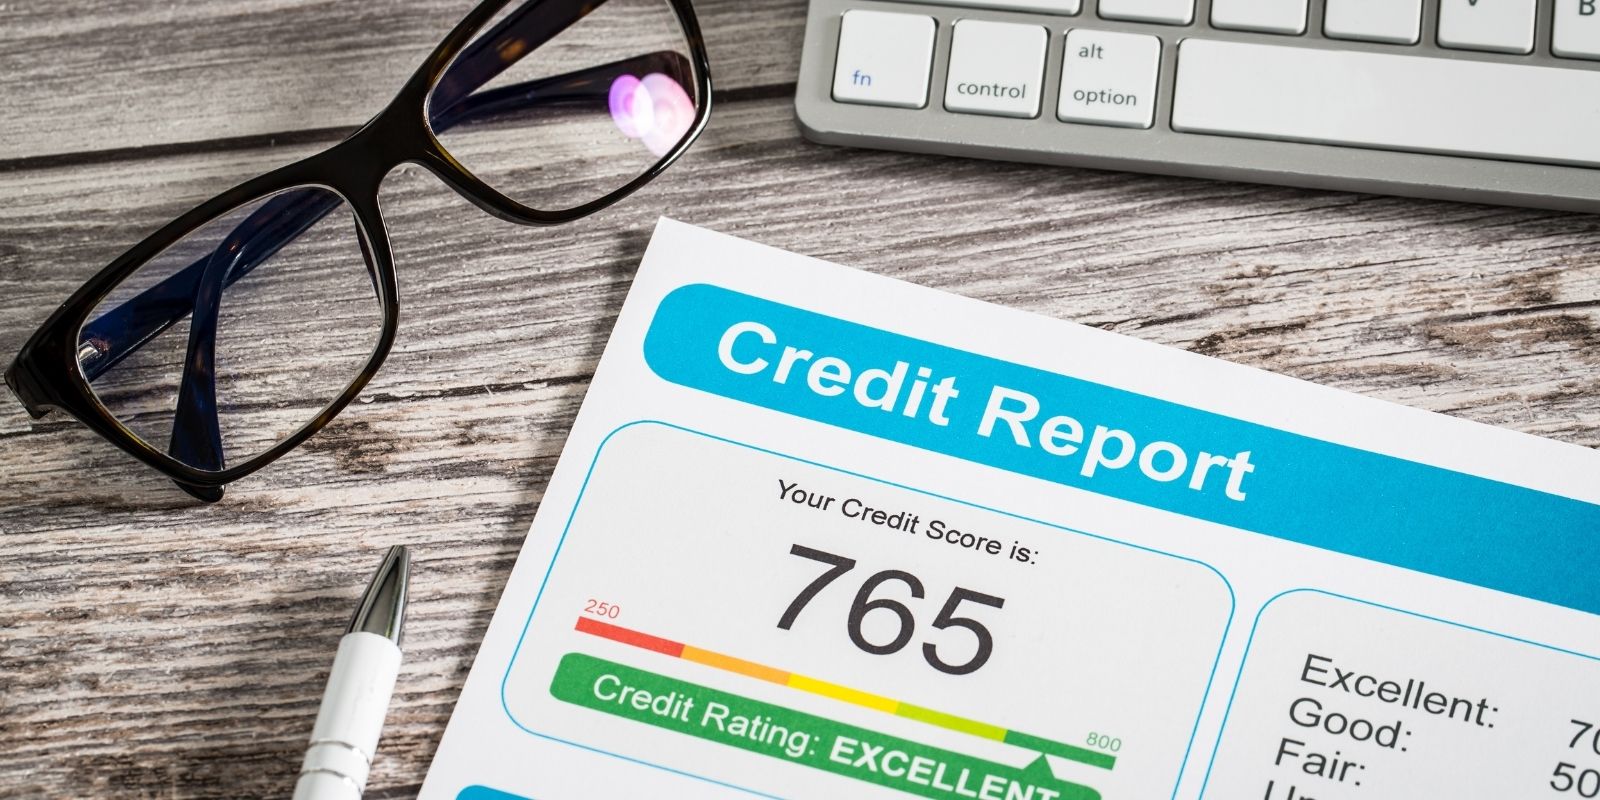 6. Helps Build Your Credit